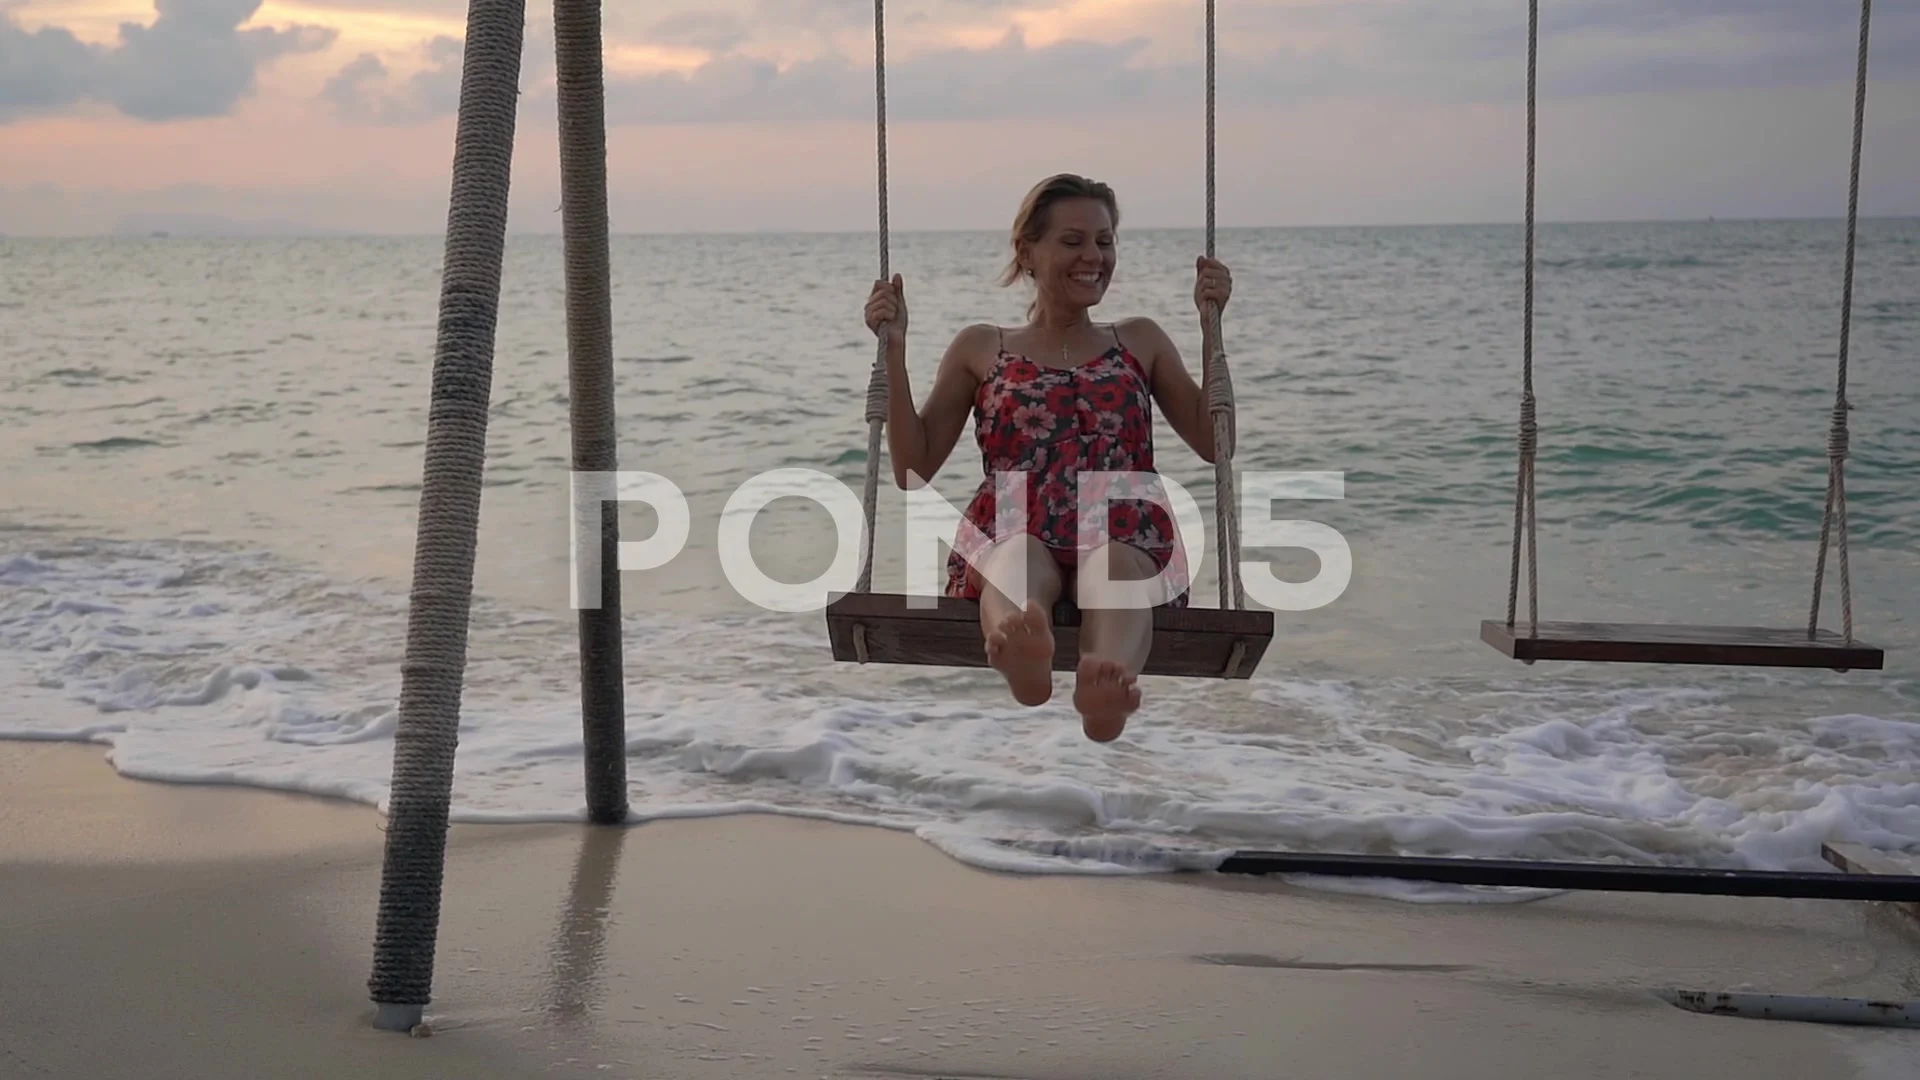 https://images.pond5.com/young-woman-swinging-swing-standing-footage-142917799_prevstill.jpeg